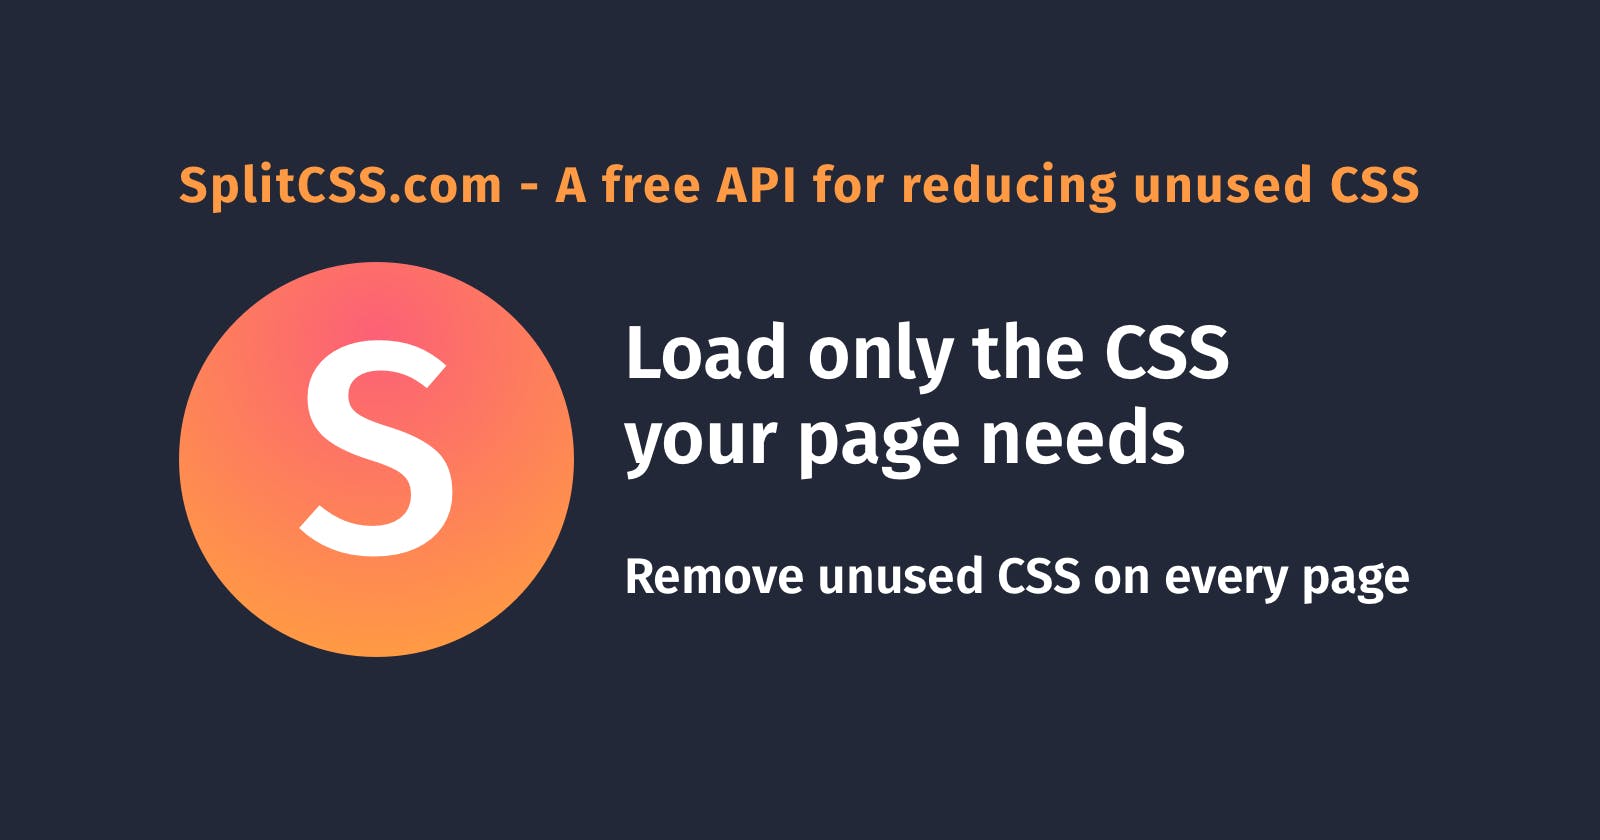 Introducing SplitCSS: the API for reducing unused CSS from your webpages. Your support is appreciated.